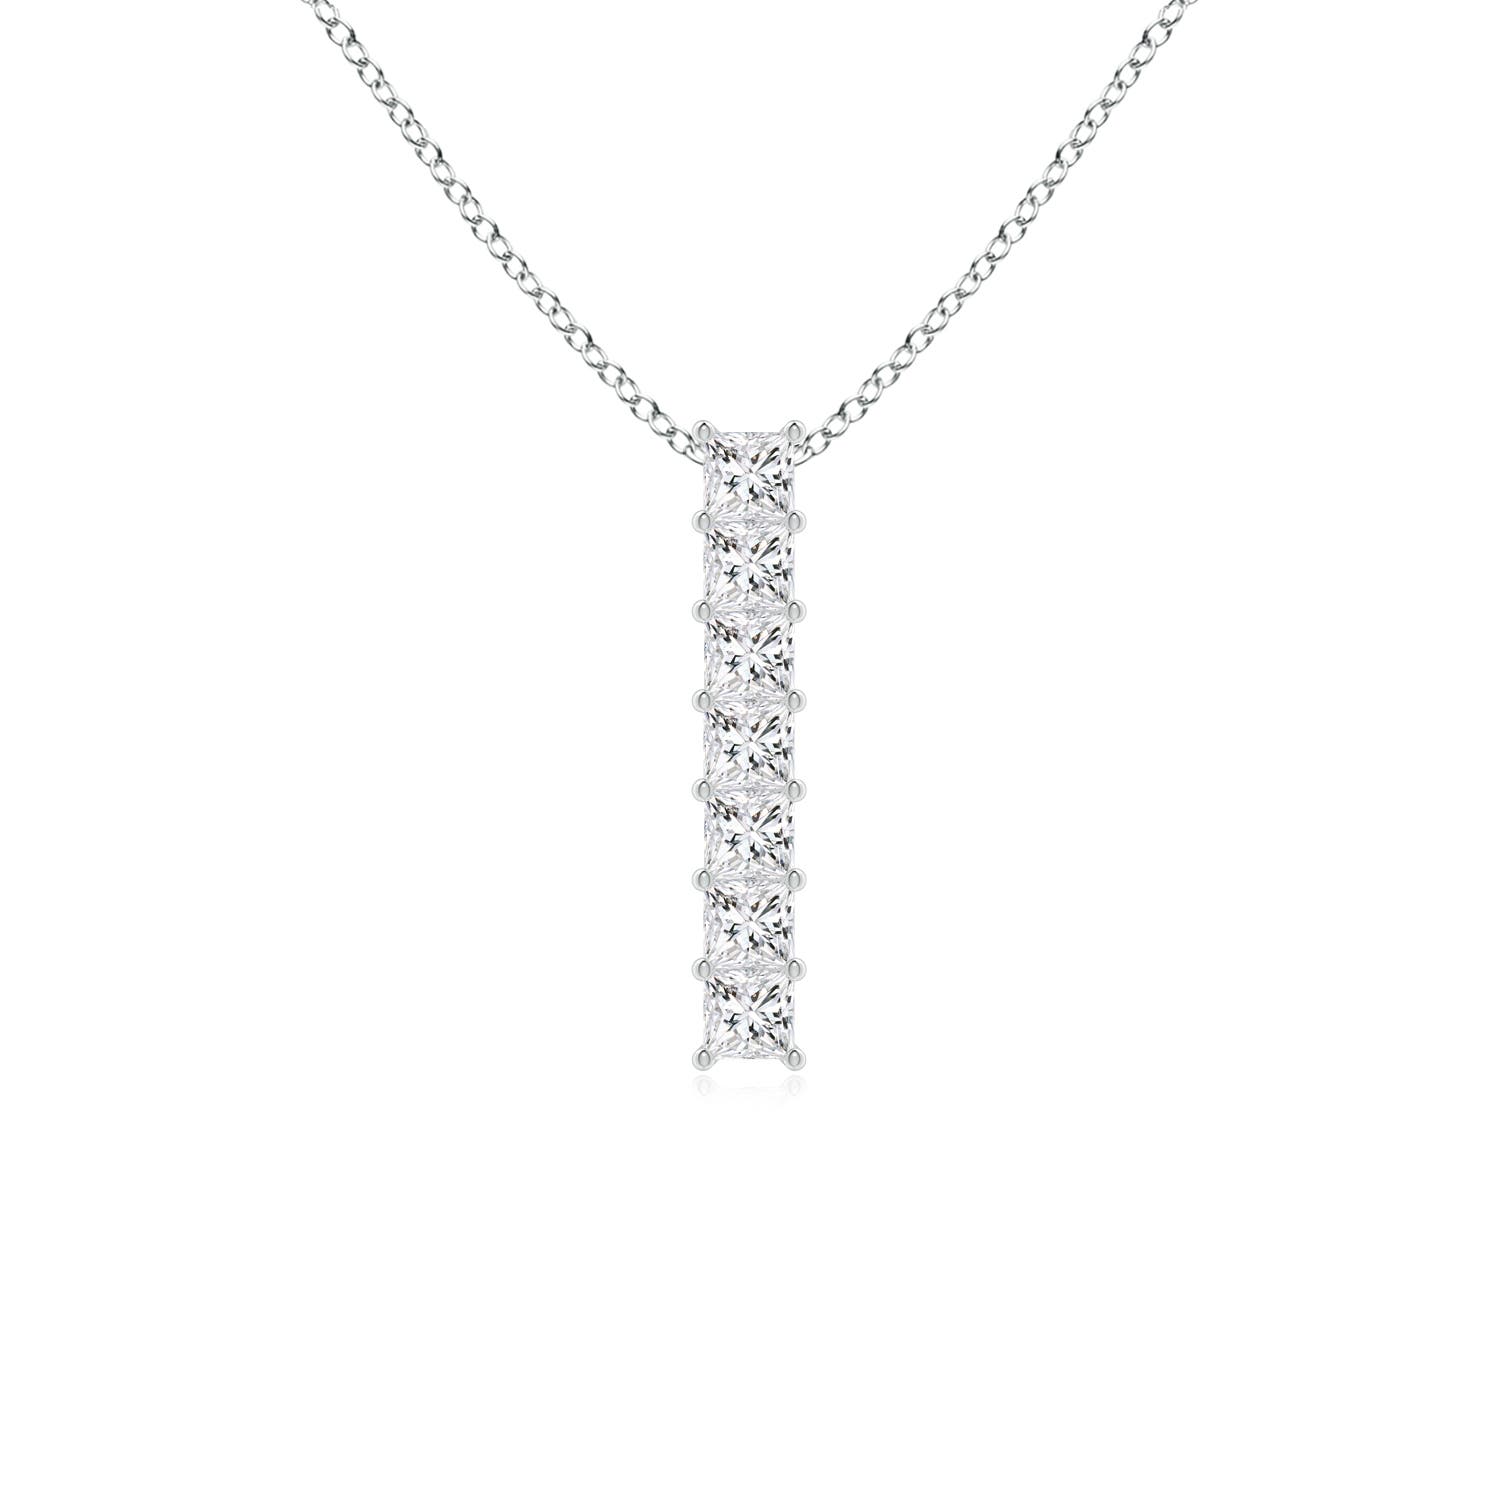 H, SI2 / 0.77 CT / 14 KT White Gold